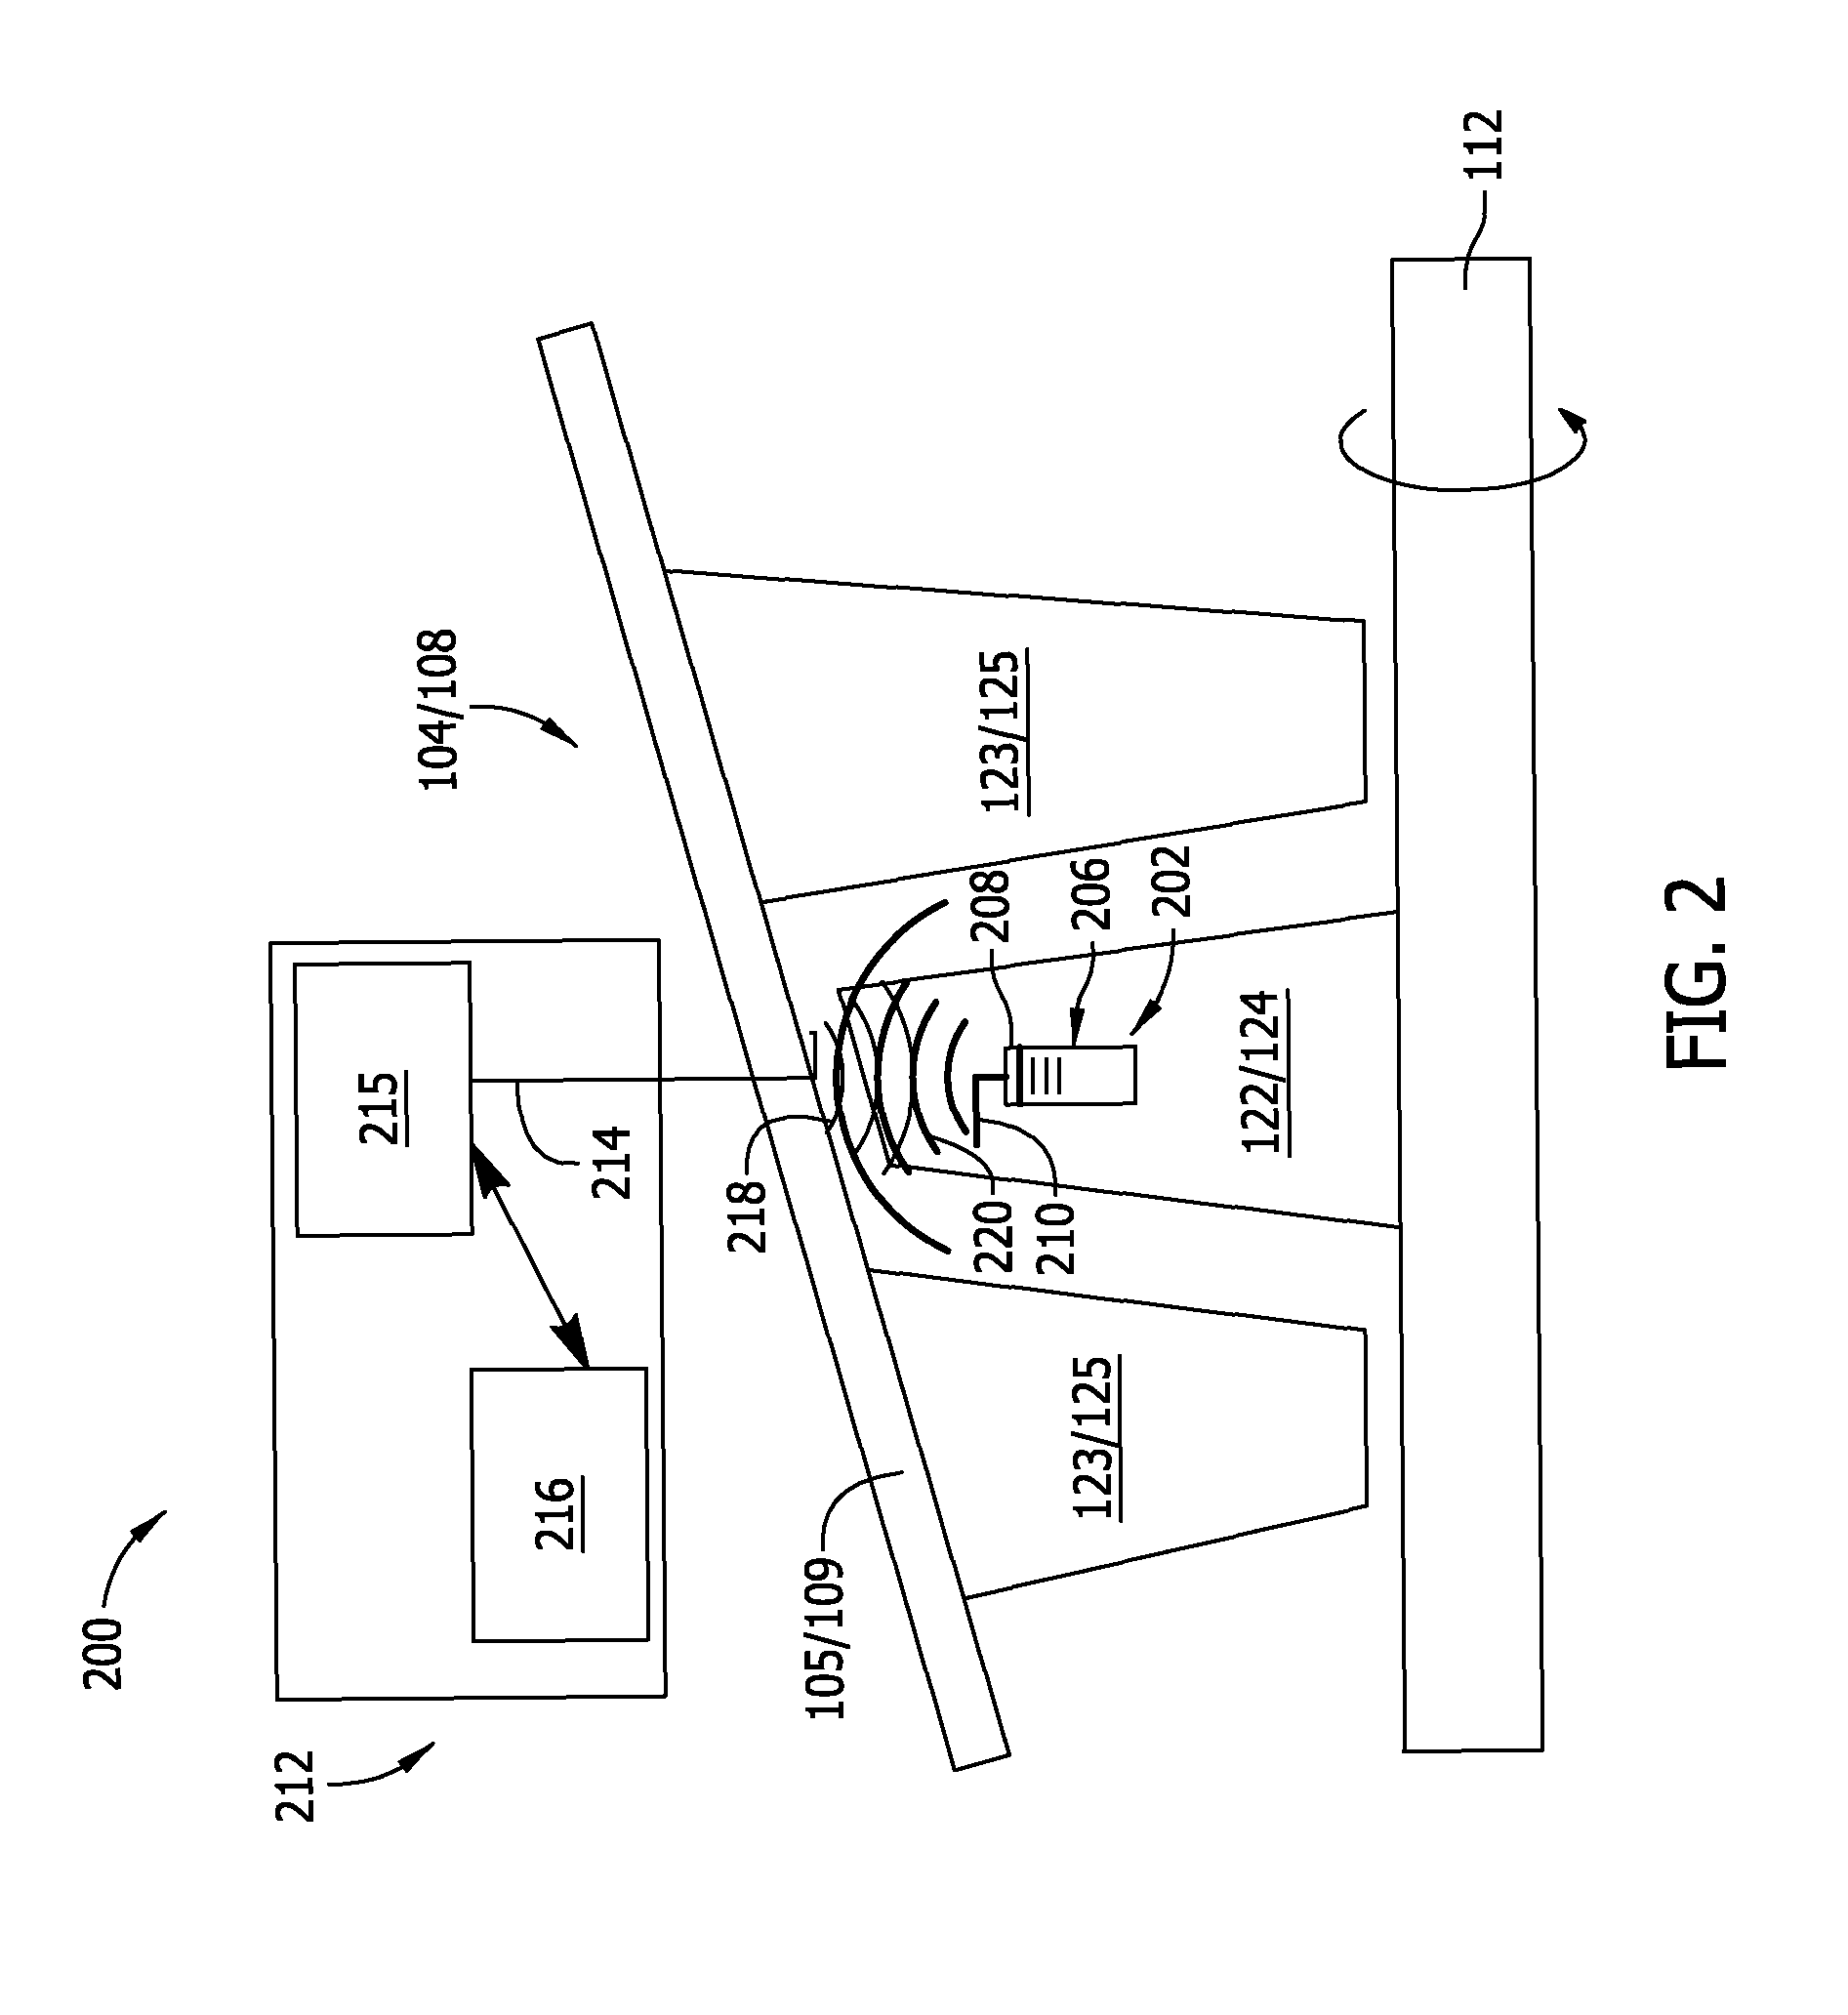 Creep life management system for a turbine engine and method of operating the same